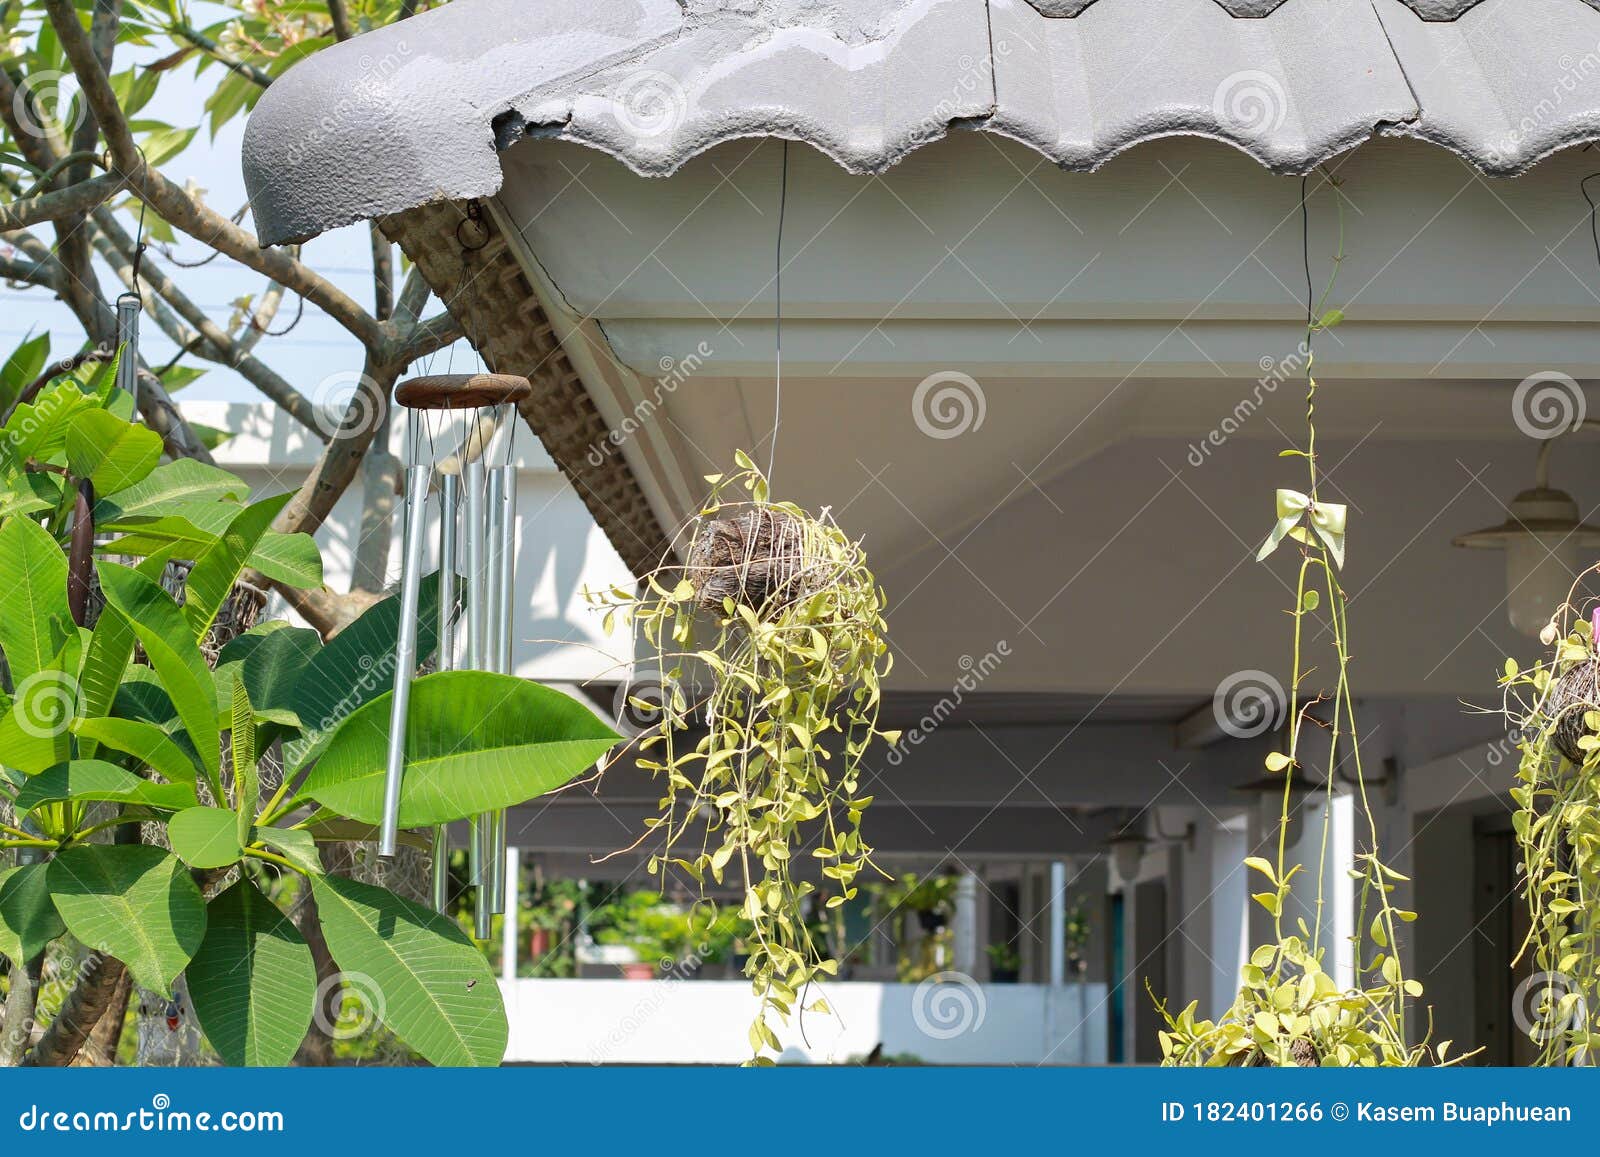 Flower Hang On Terrace To Decoration Balcony Garden And Hanging Flowers The Roof Of The House With A Beautiful Hanging Orchid Tree Stock Photo Image Of Green Door 182401266